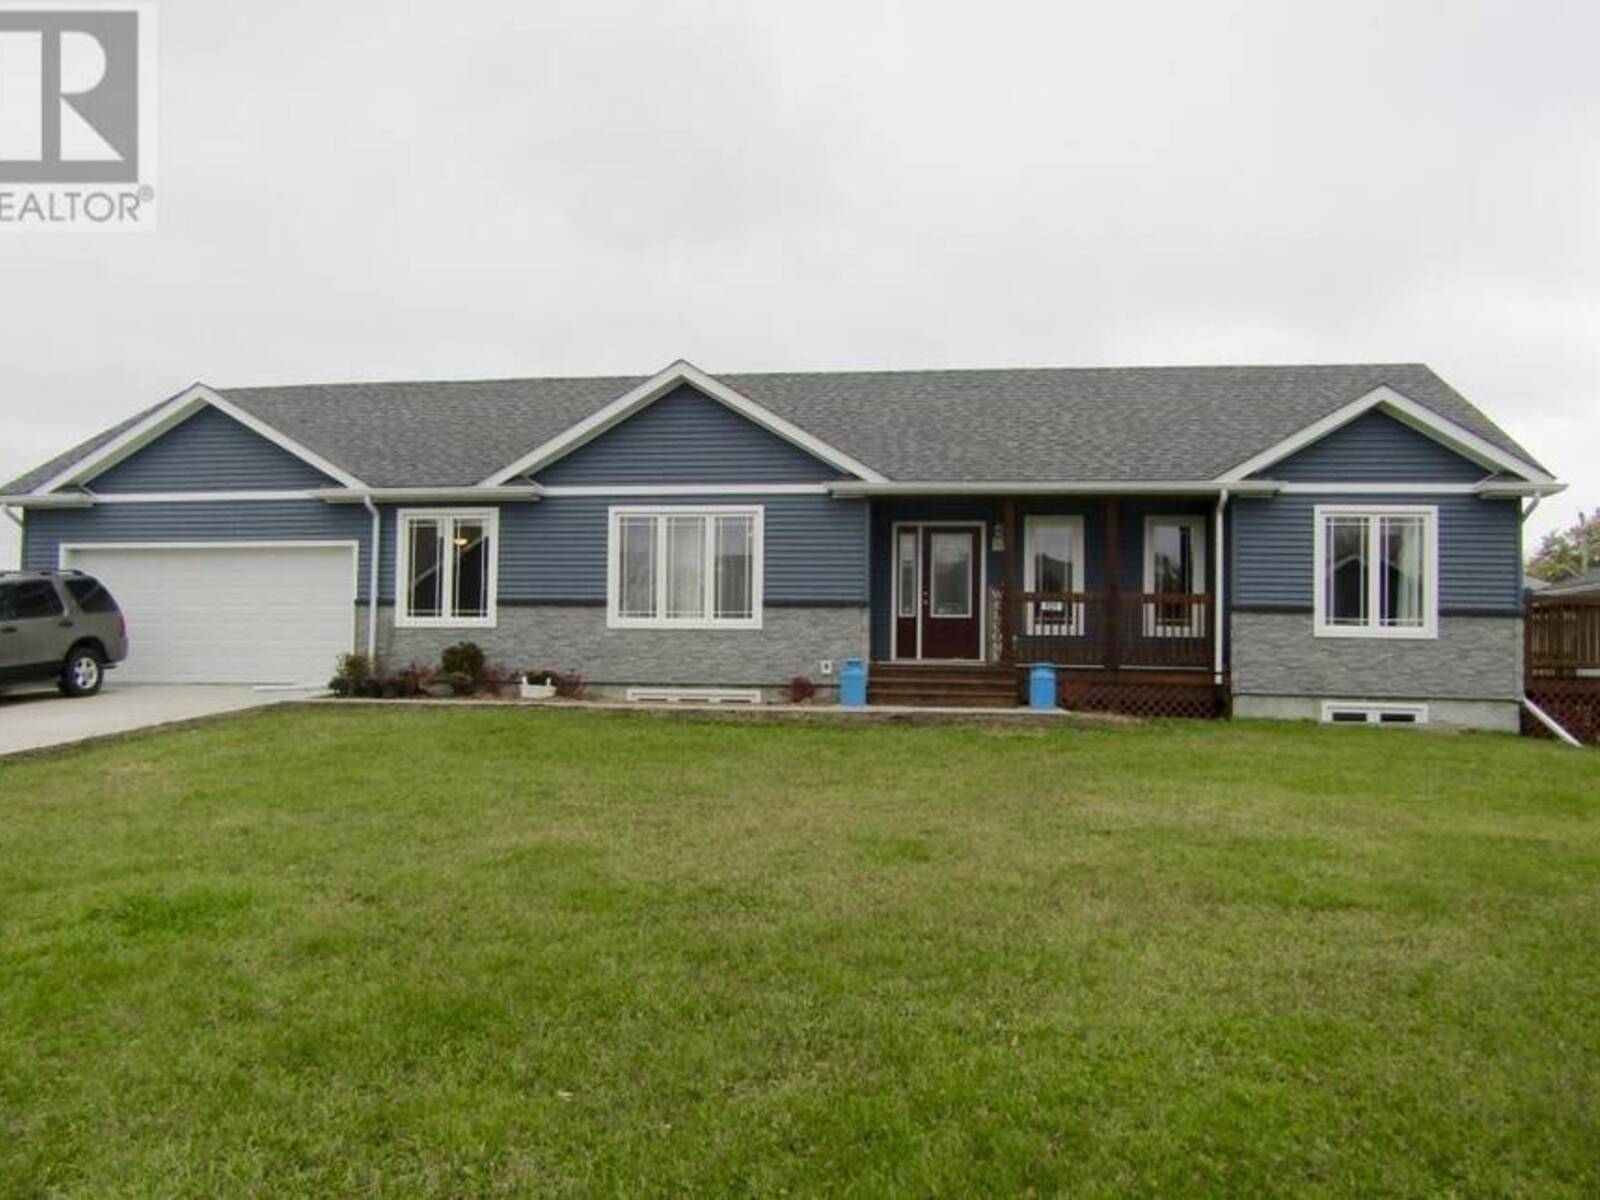 825 Huffman Court, Fort Frances, Ontario P9A 0A4